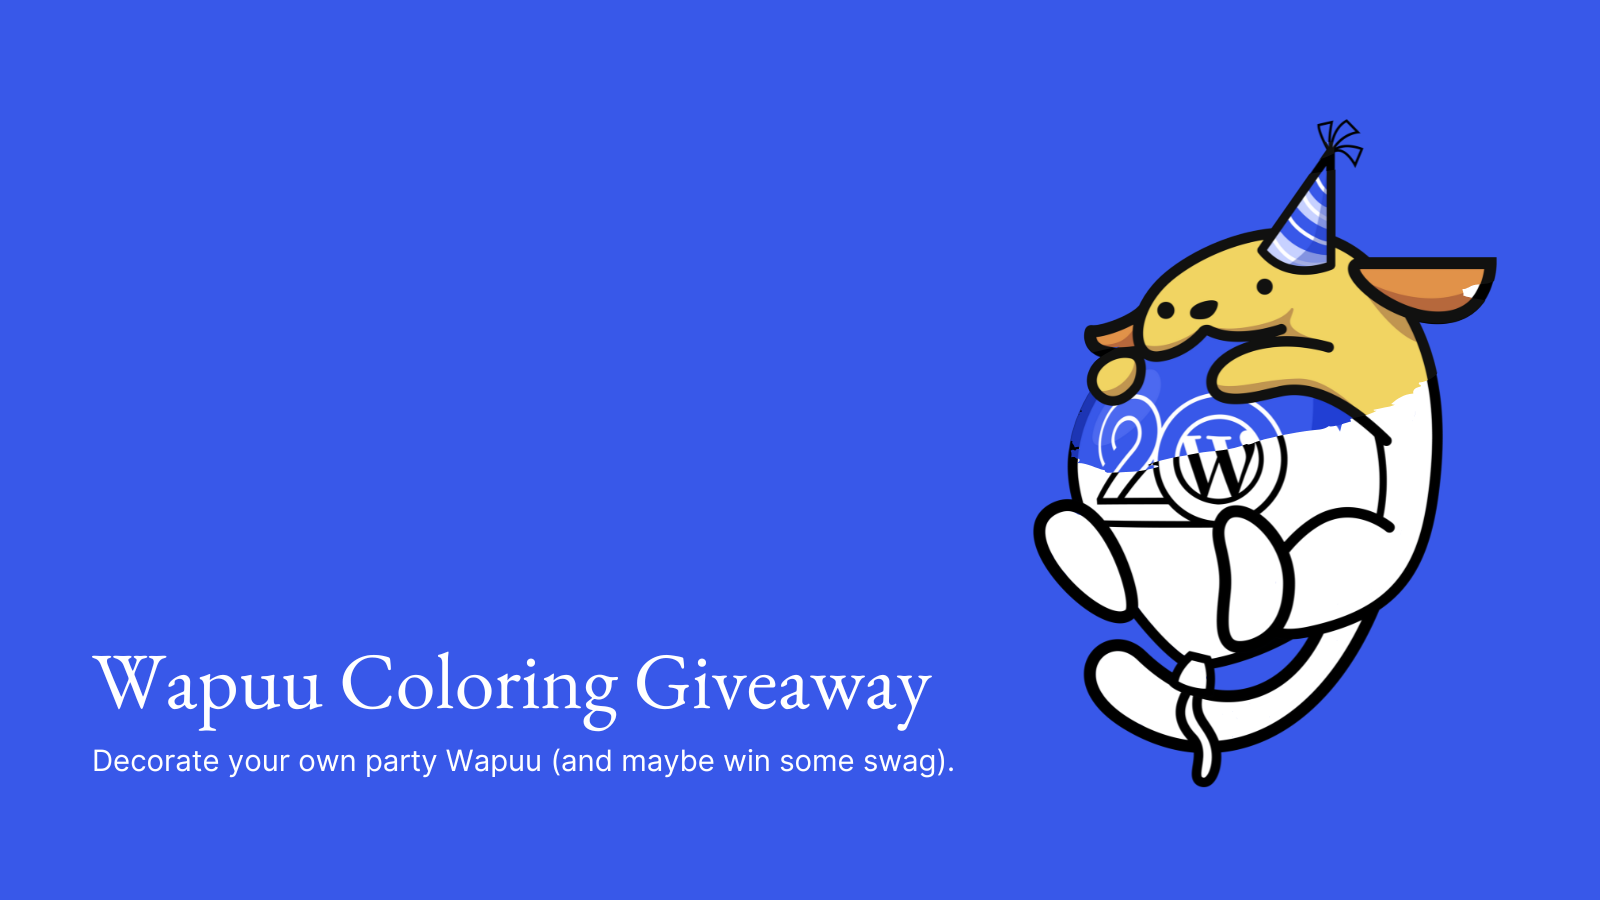 Wapuu Coloring Giveaway: Style Your Own Party Wapuu